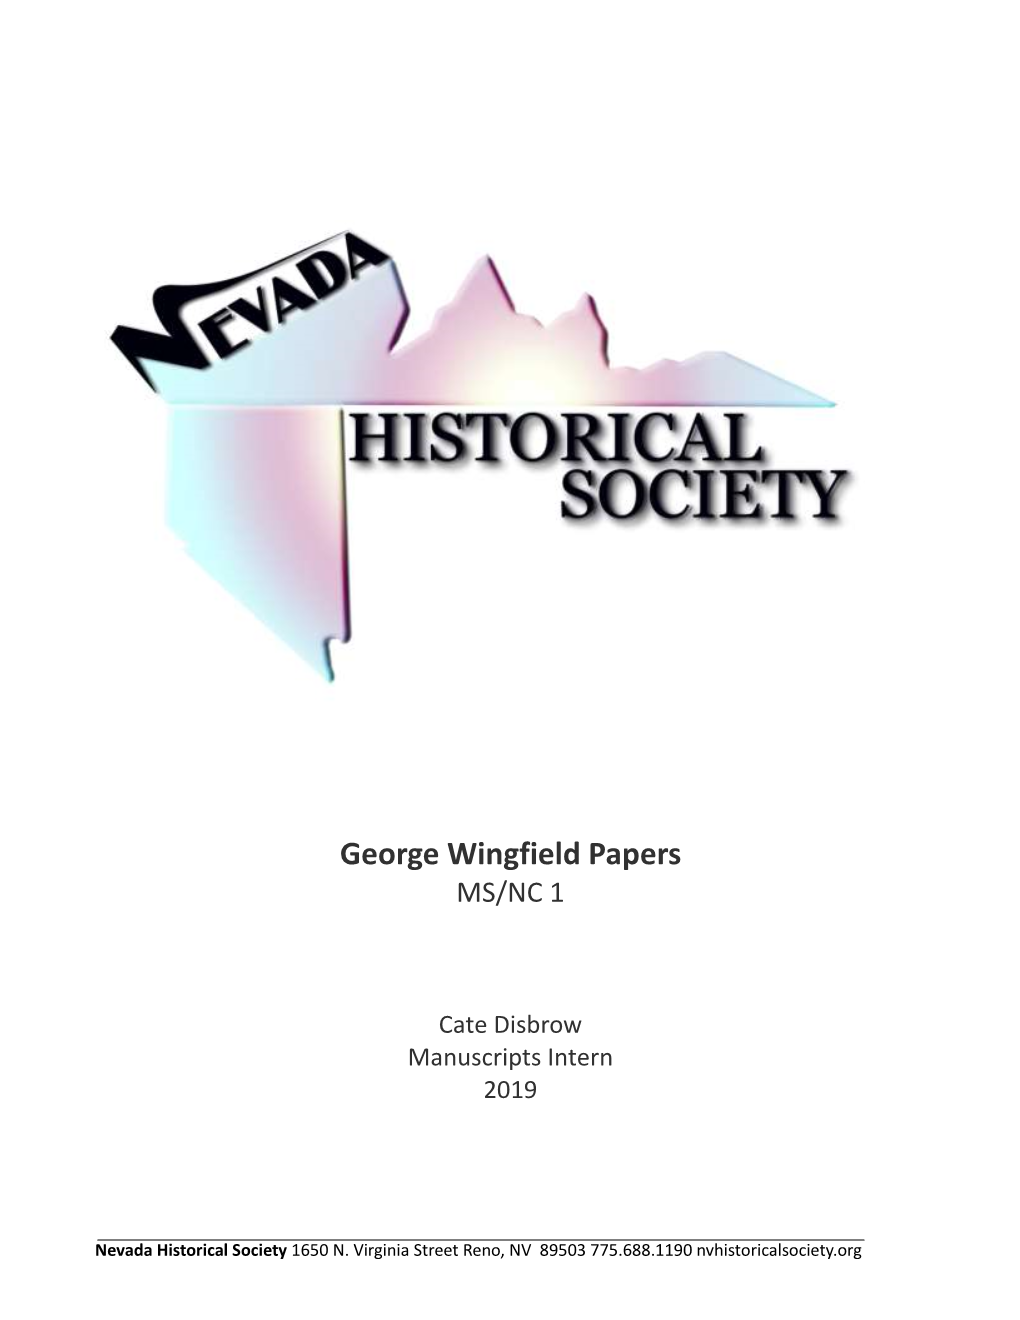 George Wingfield Papers MS/NC 1